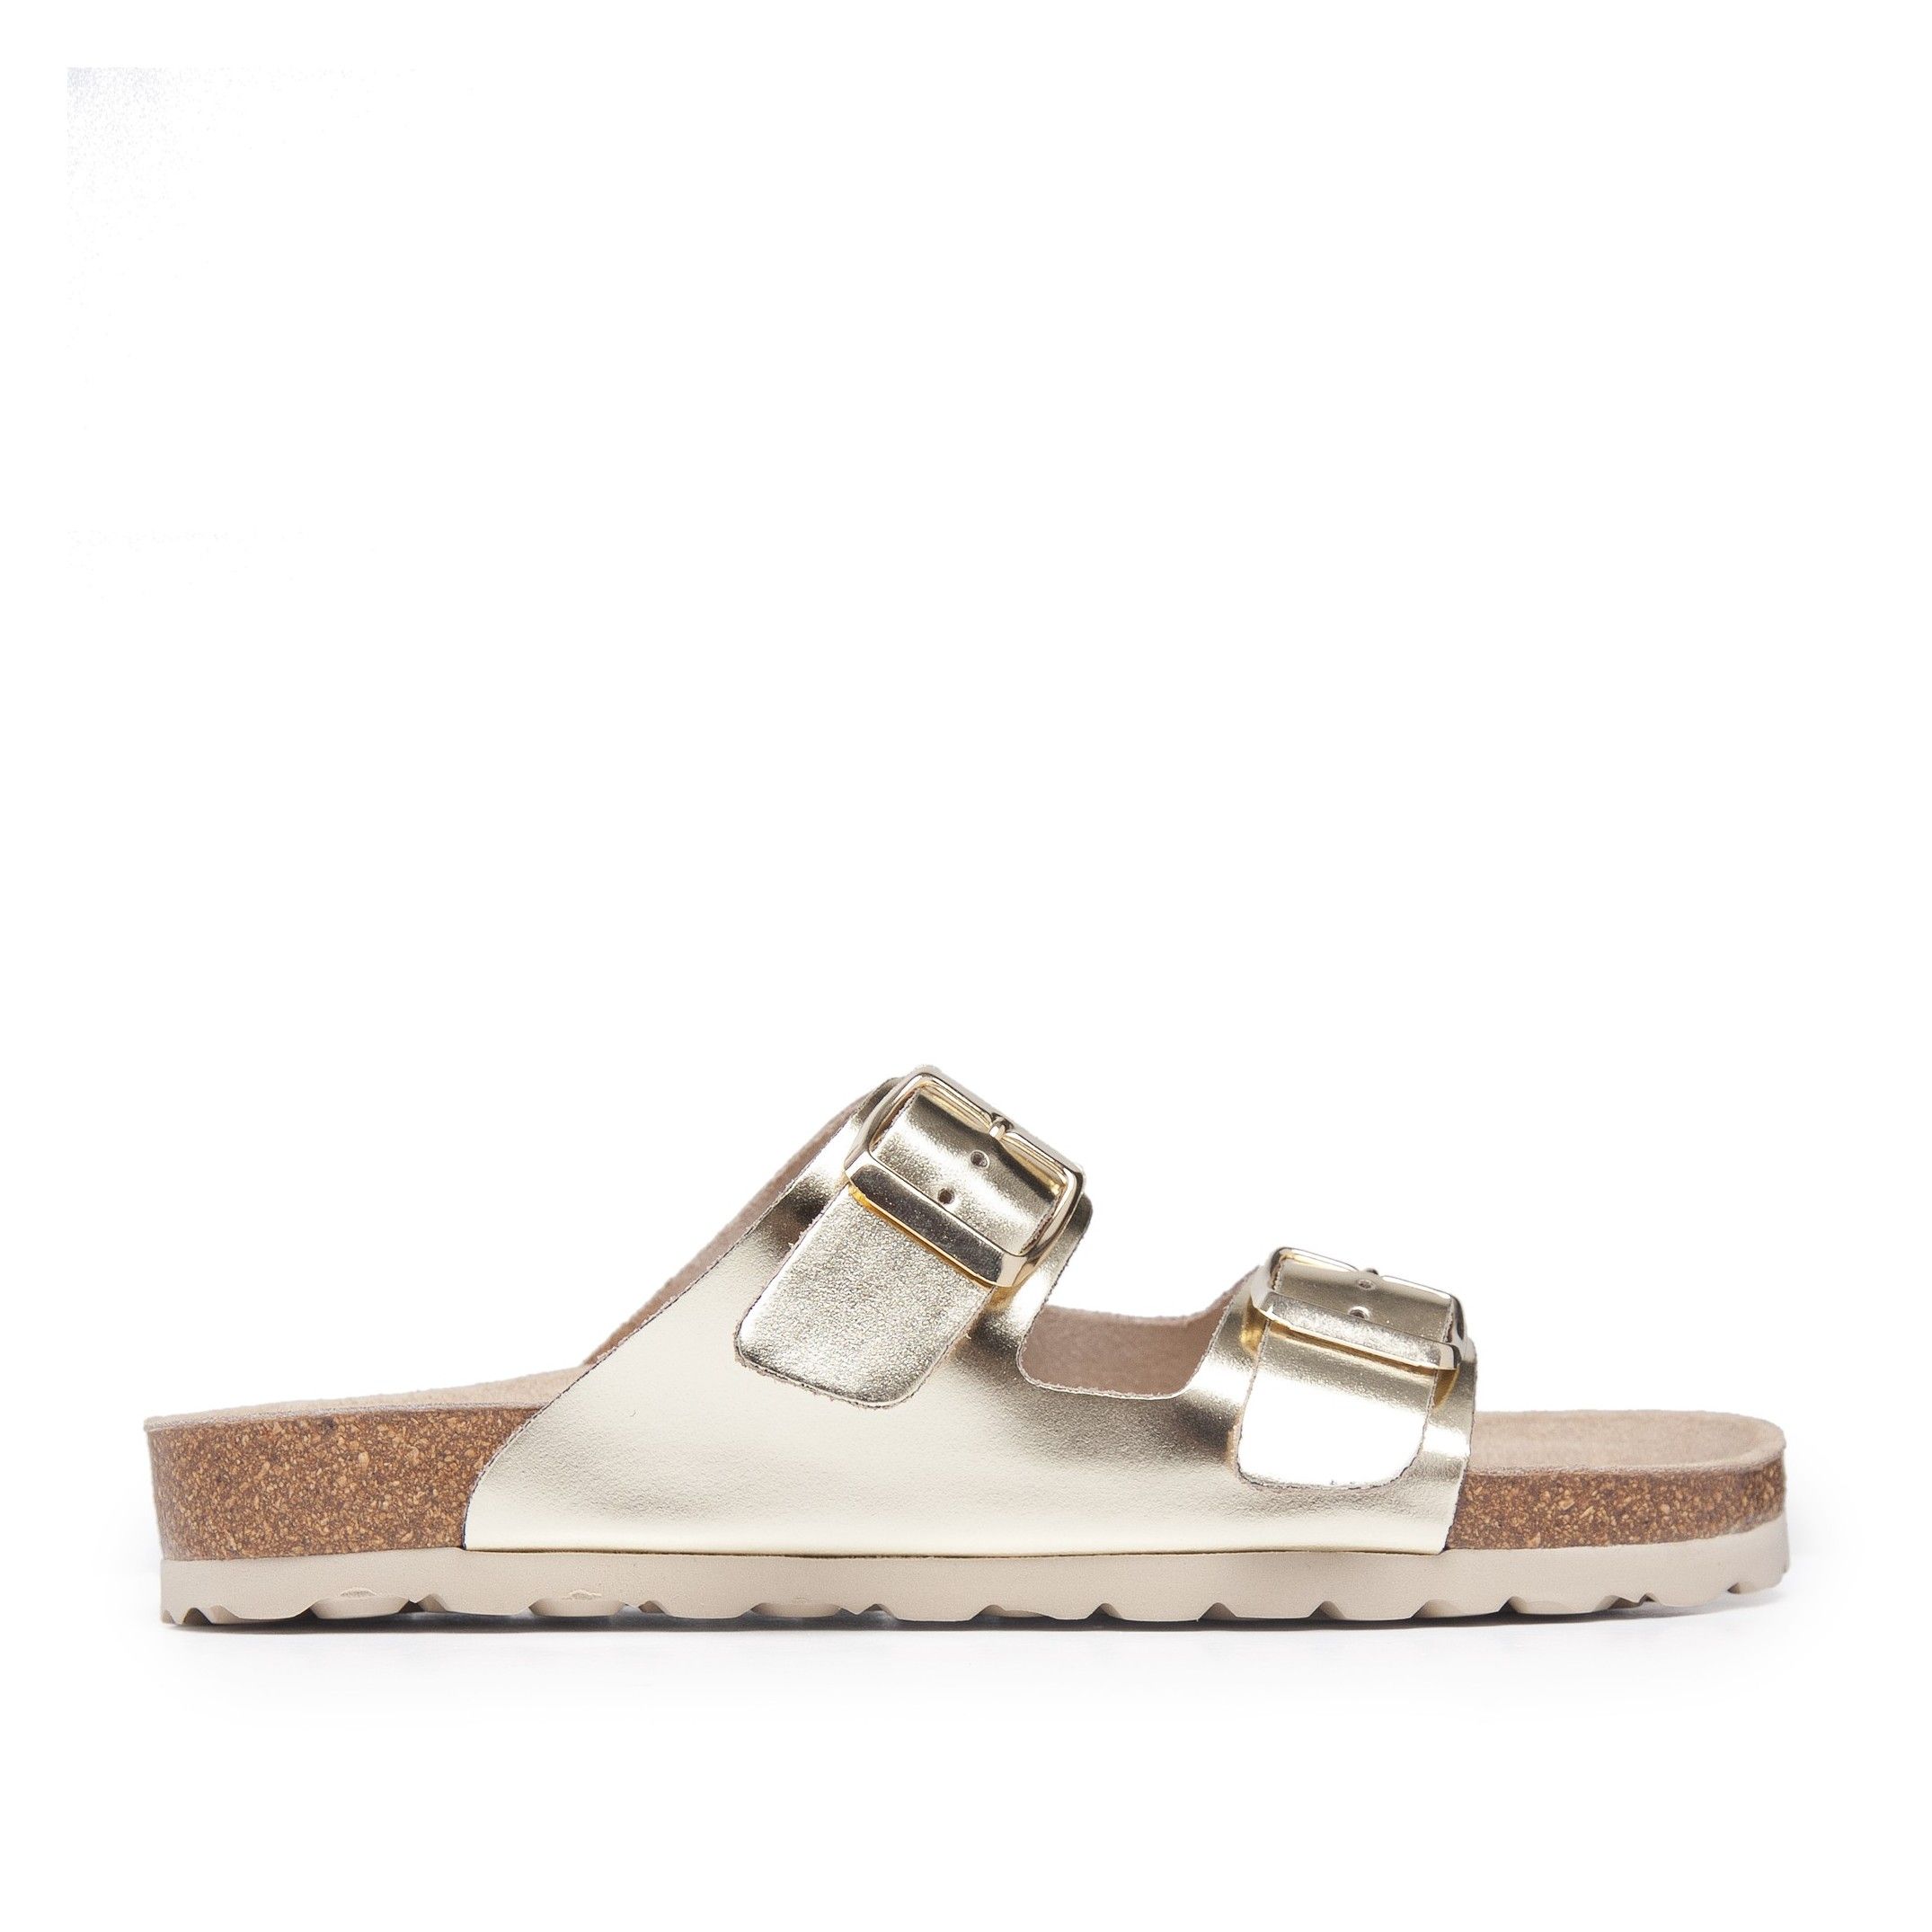 Bio sandal with double leather buckle. Adjustable metal buckle. Upper and inner made of leather. Insole: leather. Platform: 1 cm. Sole: EVA. This product is manufactured in Spain.